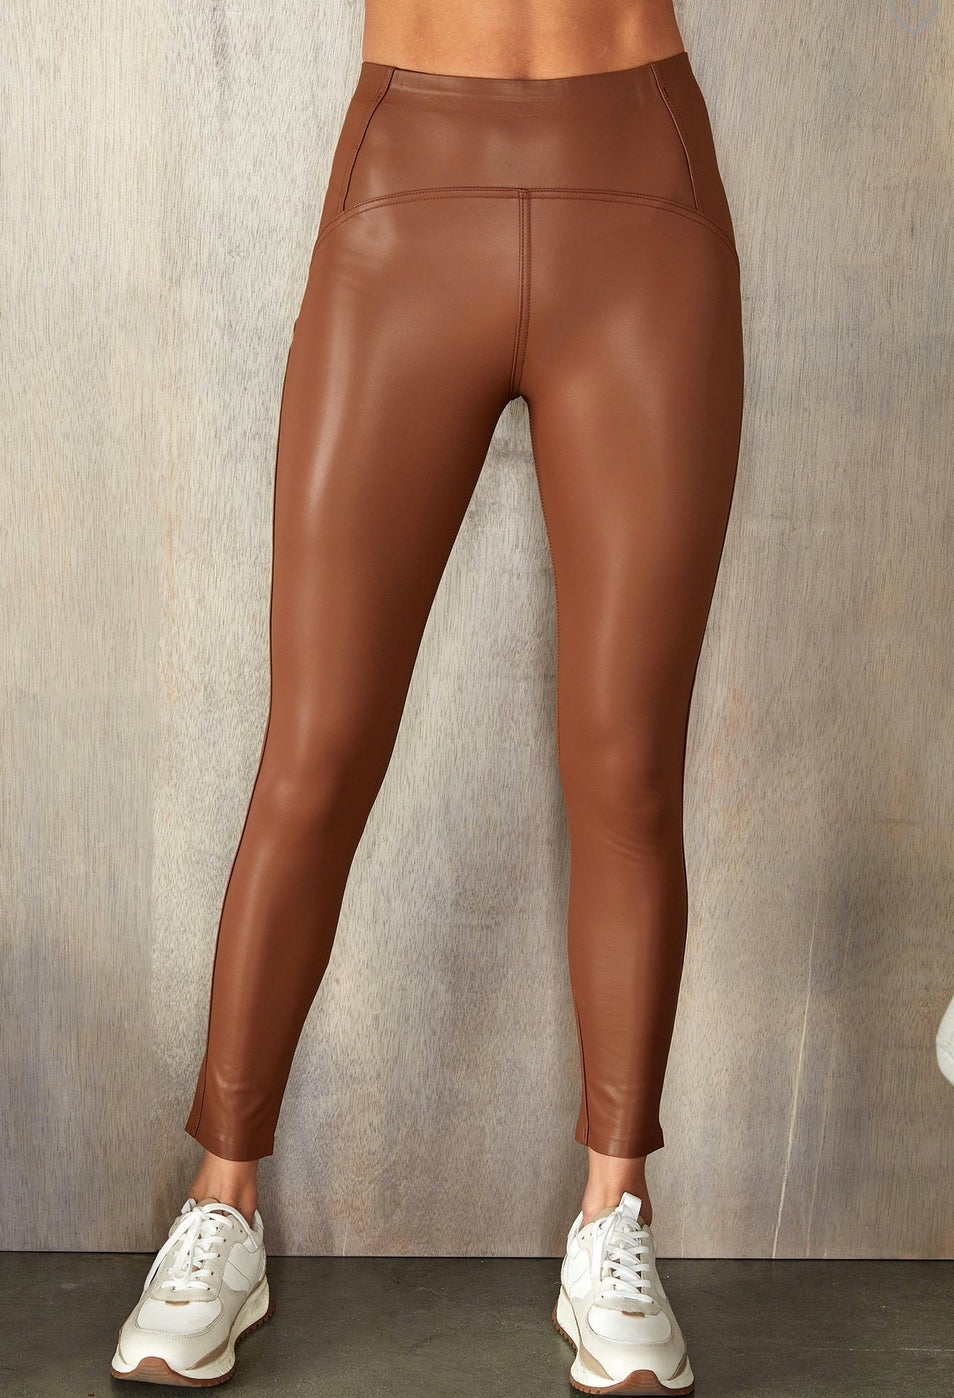 Got these Sierra faux leather leggings on my grocery run today